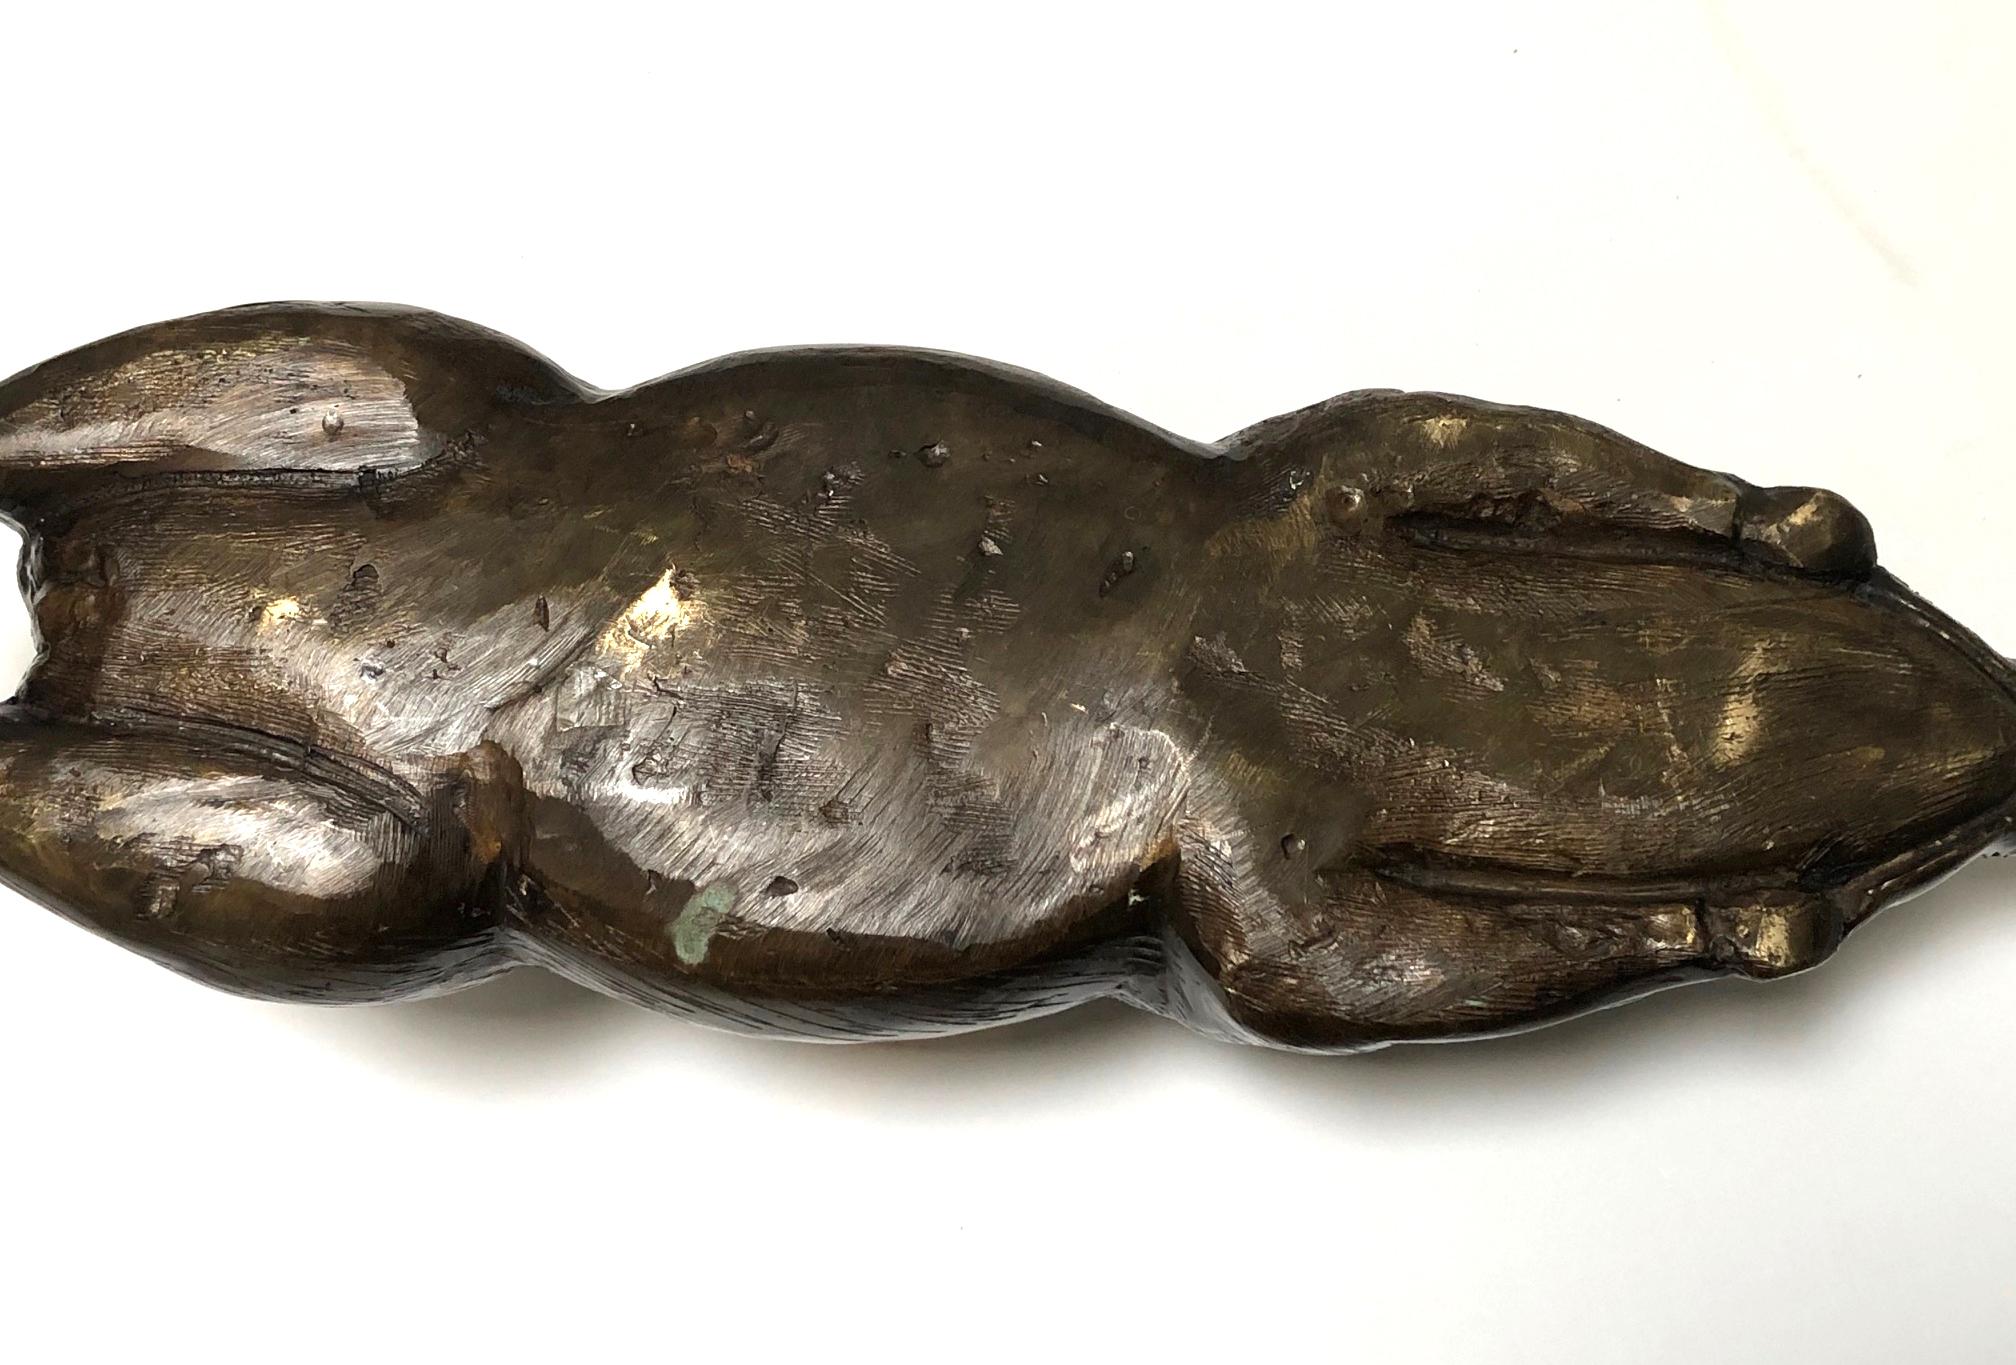 Crafted of cast bronze with nice patina depicting a well-detailed reclining pig with extended legs, arching ears, curled tail, and fur details throughout.